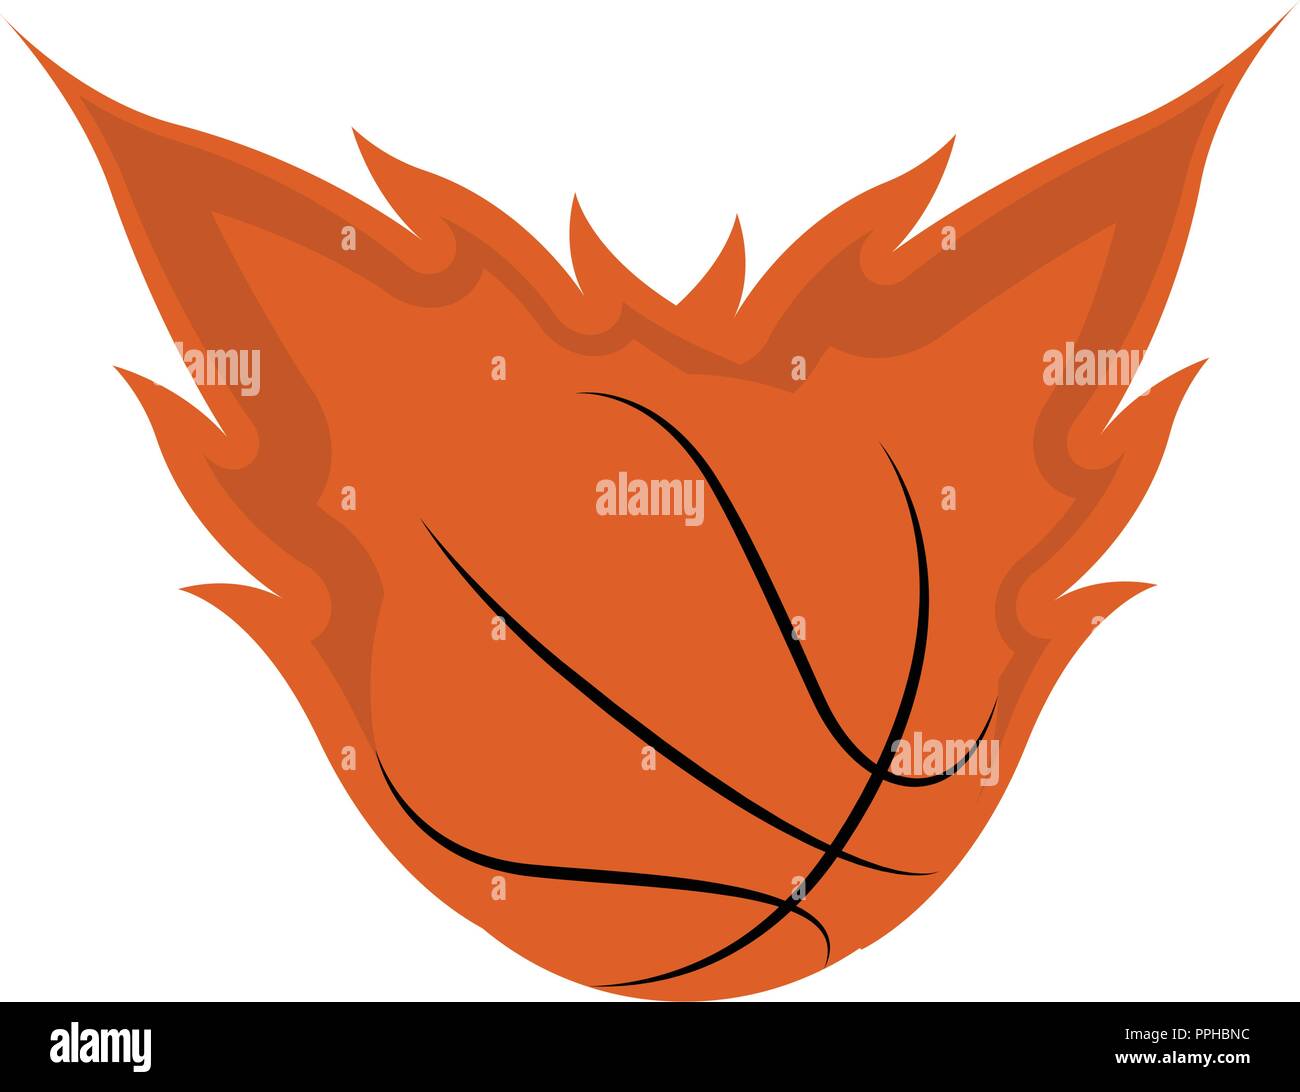 Isolated basketball ball with fire effect Stock Vector